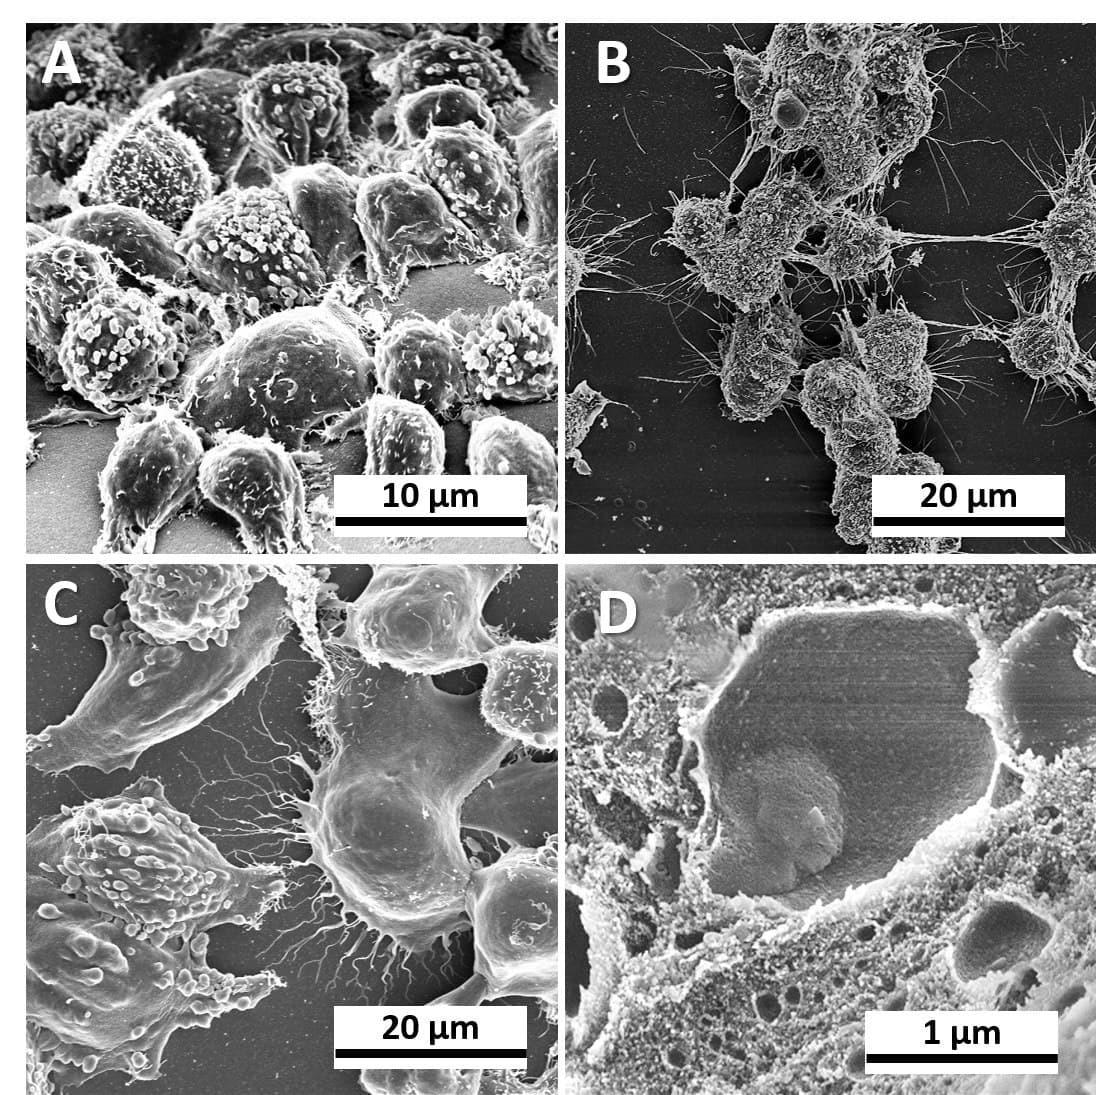 Magnetic Nanoparticles-Based Reproducible System for Co-Cultivation of Cells.